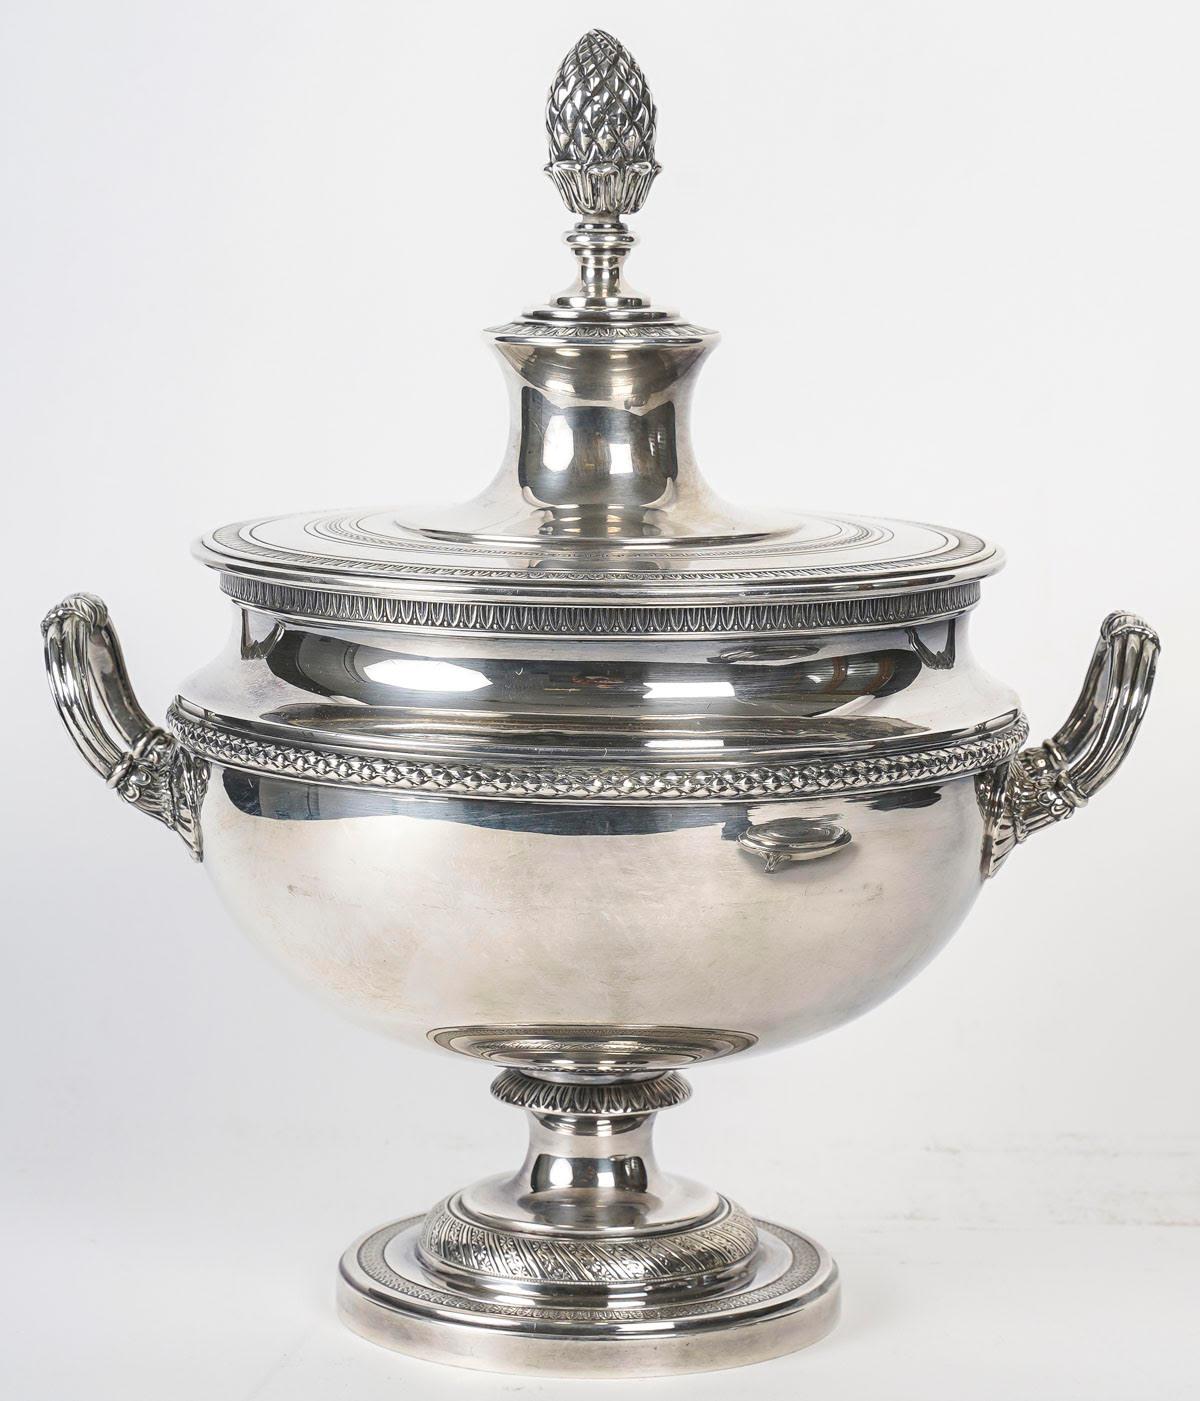 19th Century Soup Tureen or Centrepiece from the House of CHRYSALIA Goldsmith, Napoleon III. For Sale